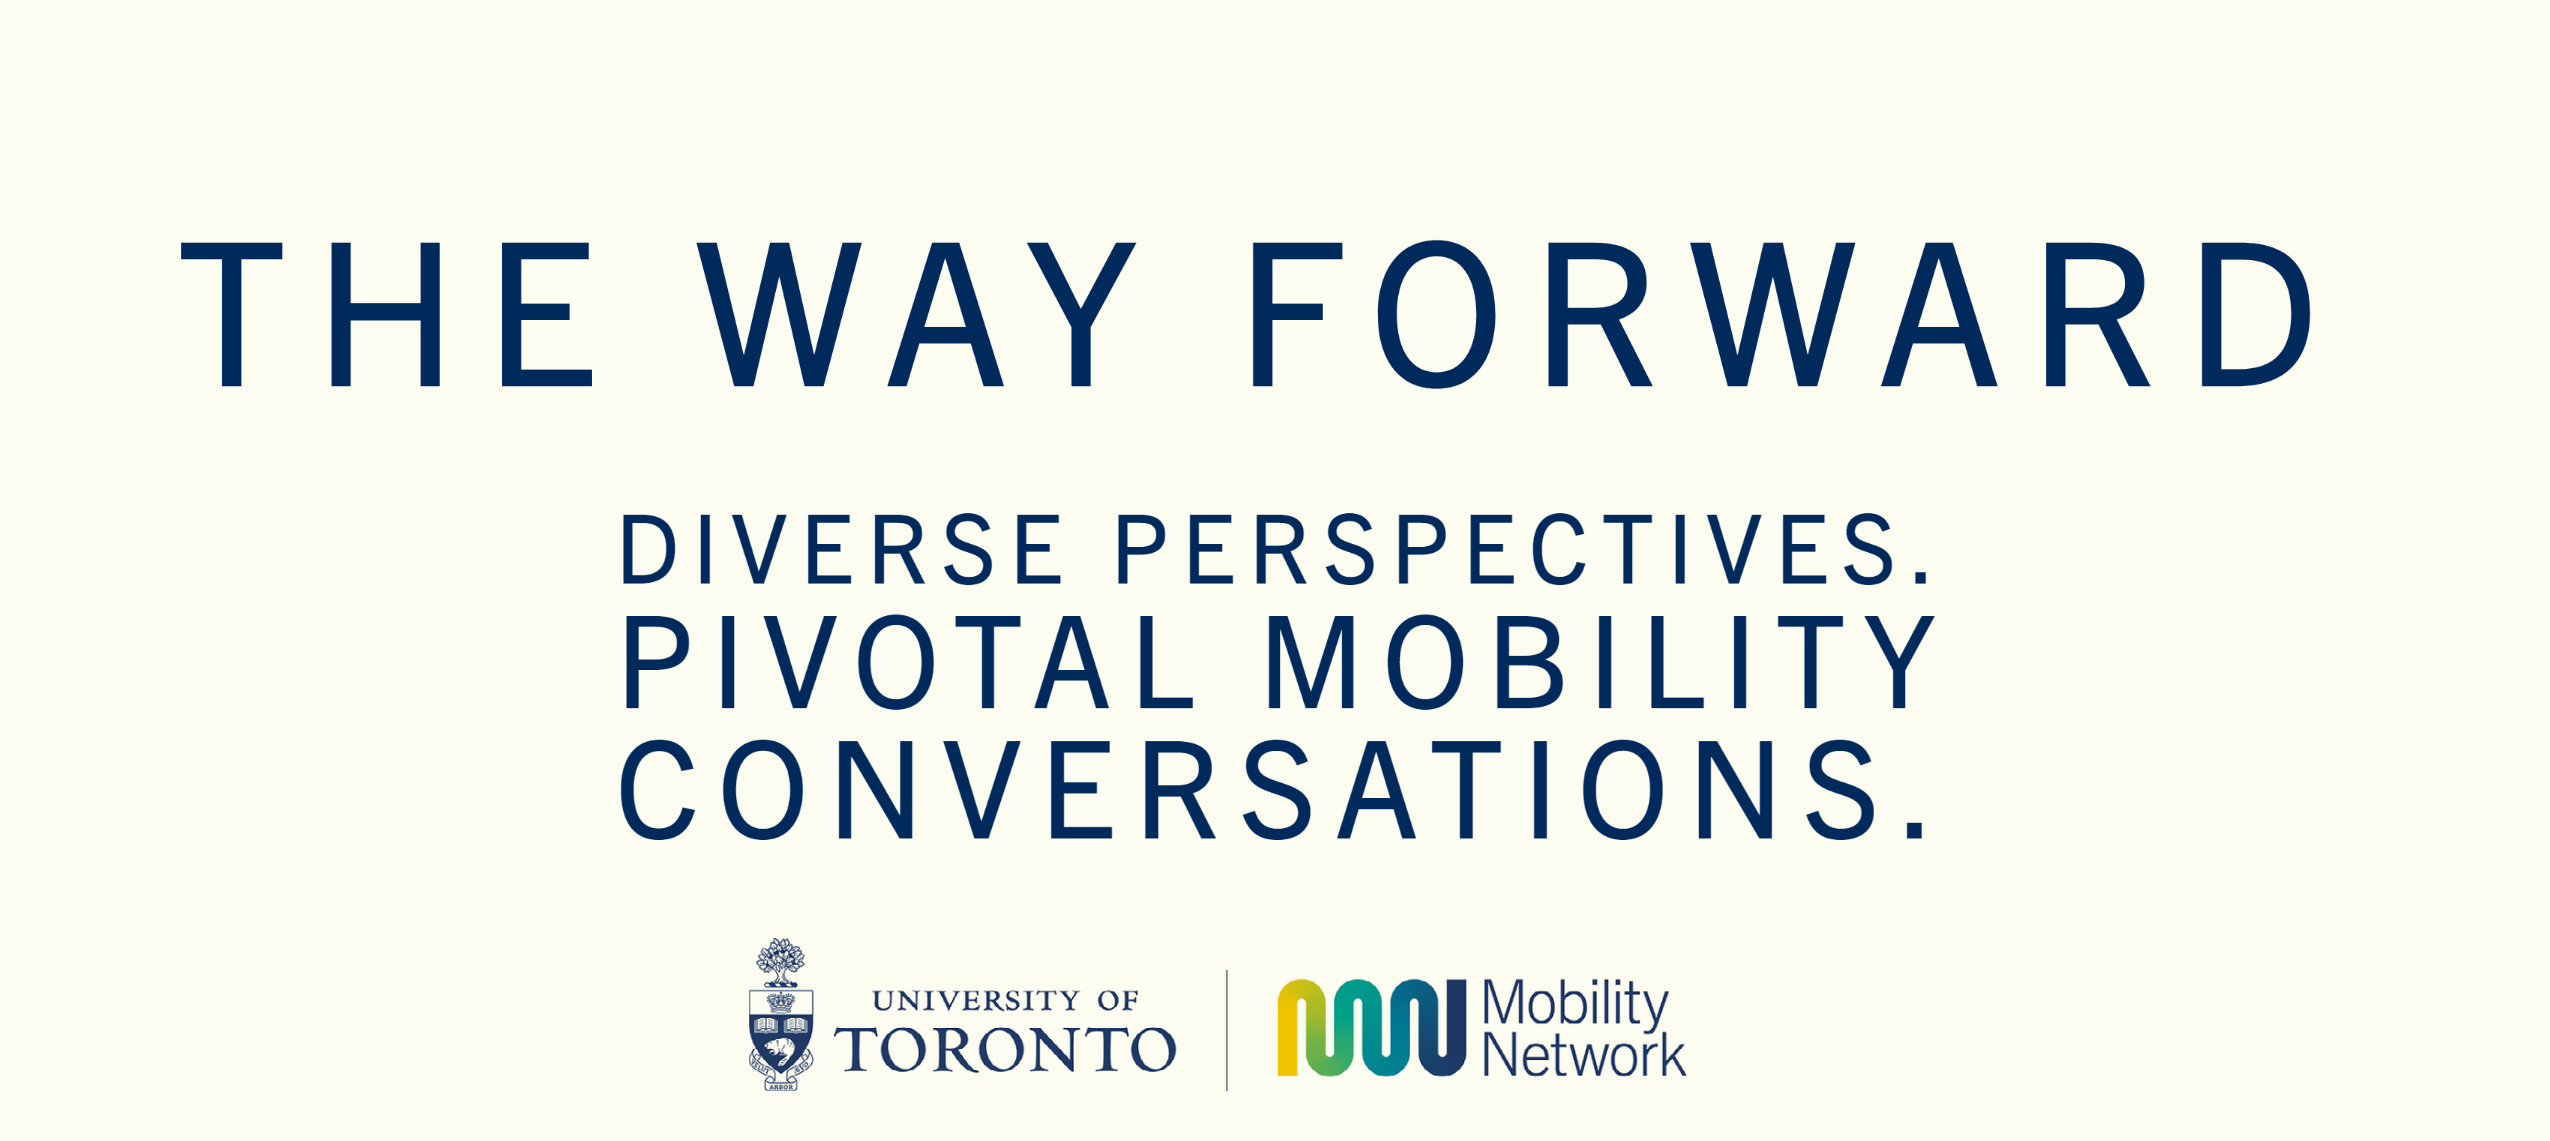 Discussion Series header with title The Way Forward and subheading Diverse Perspectives. Piviotal mobility conversations.